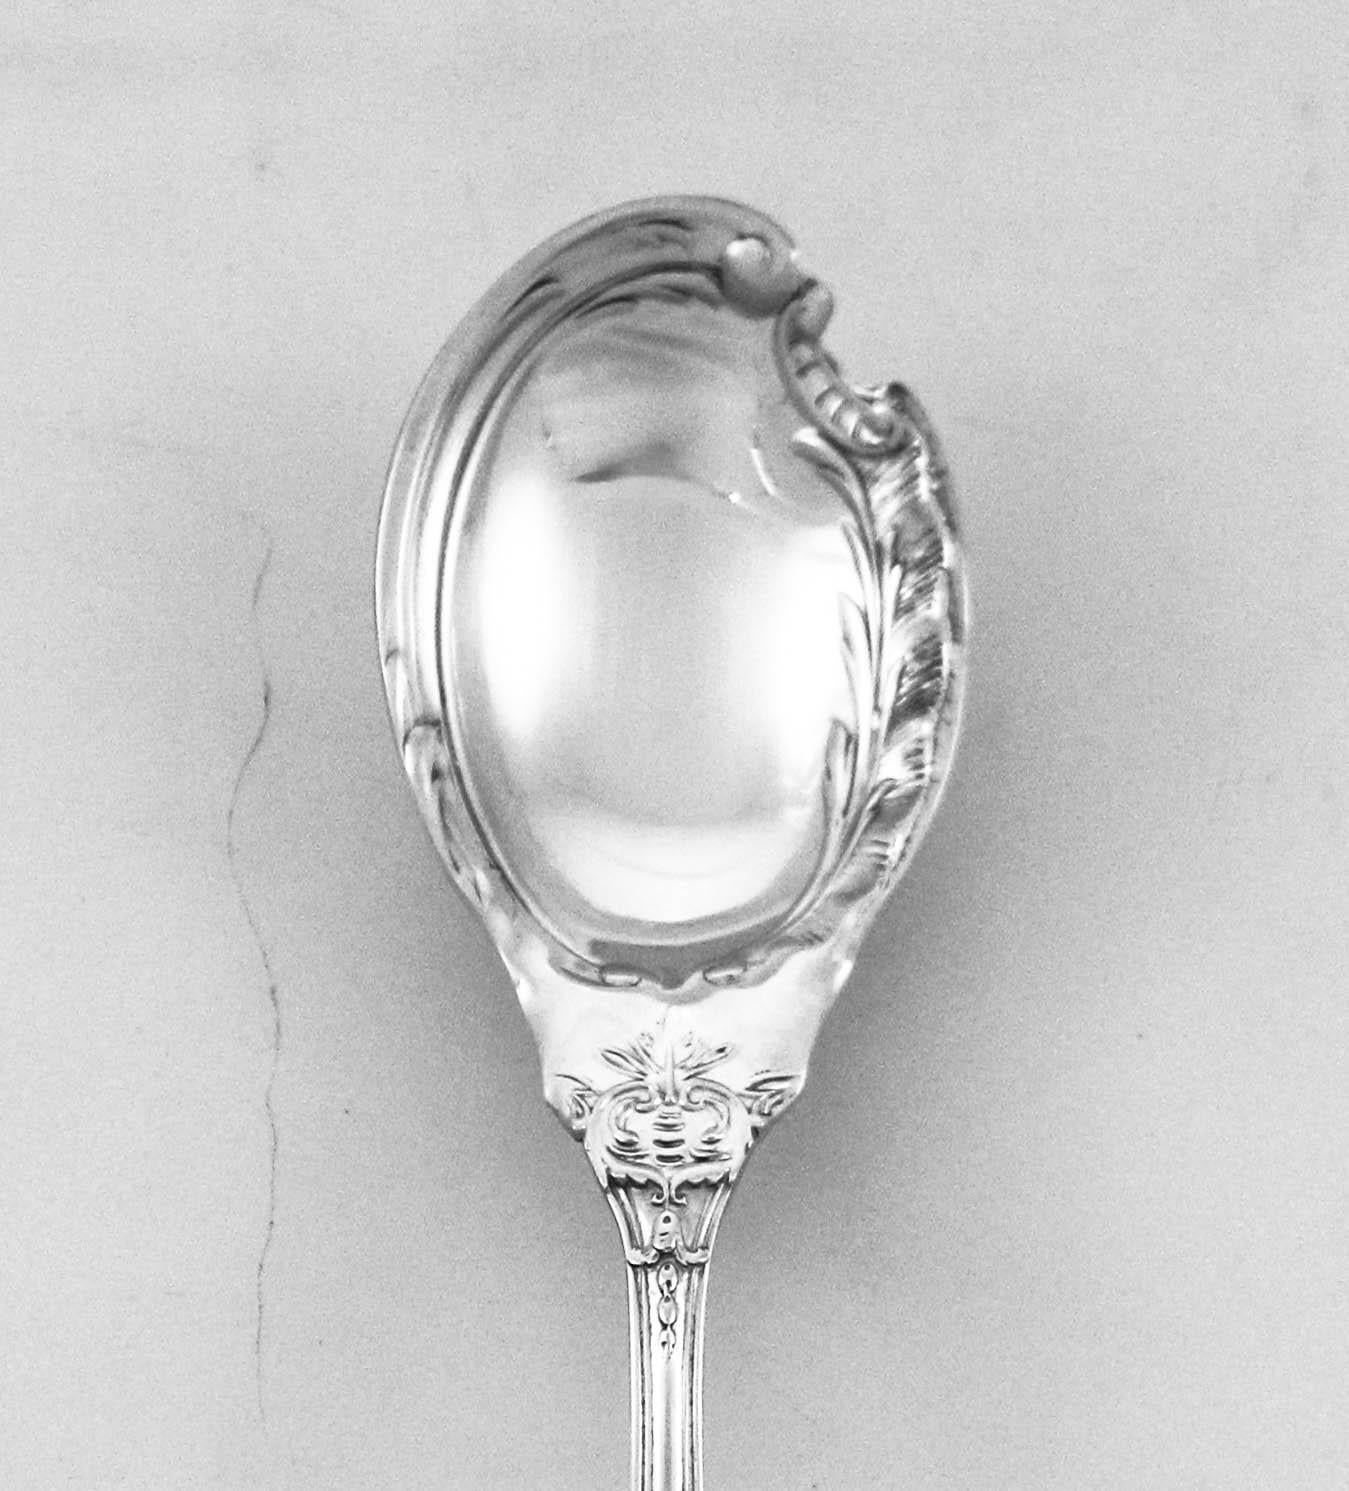 We are offering this sterling silver oyster server by Reed and Barton in the Francis I pattern. Francis I is R&B’s most famous pattern. It’s a legend in the sterling flatware industry. This piece is called an oyster server but can (obviously) be